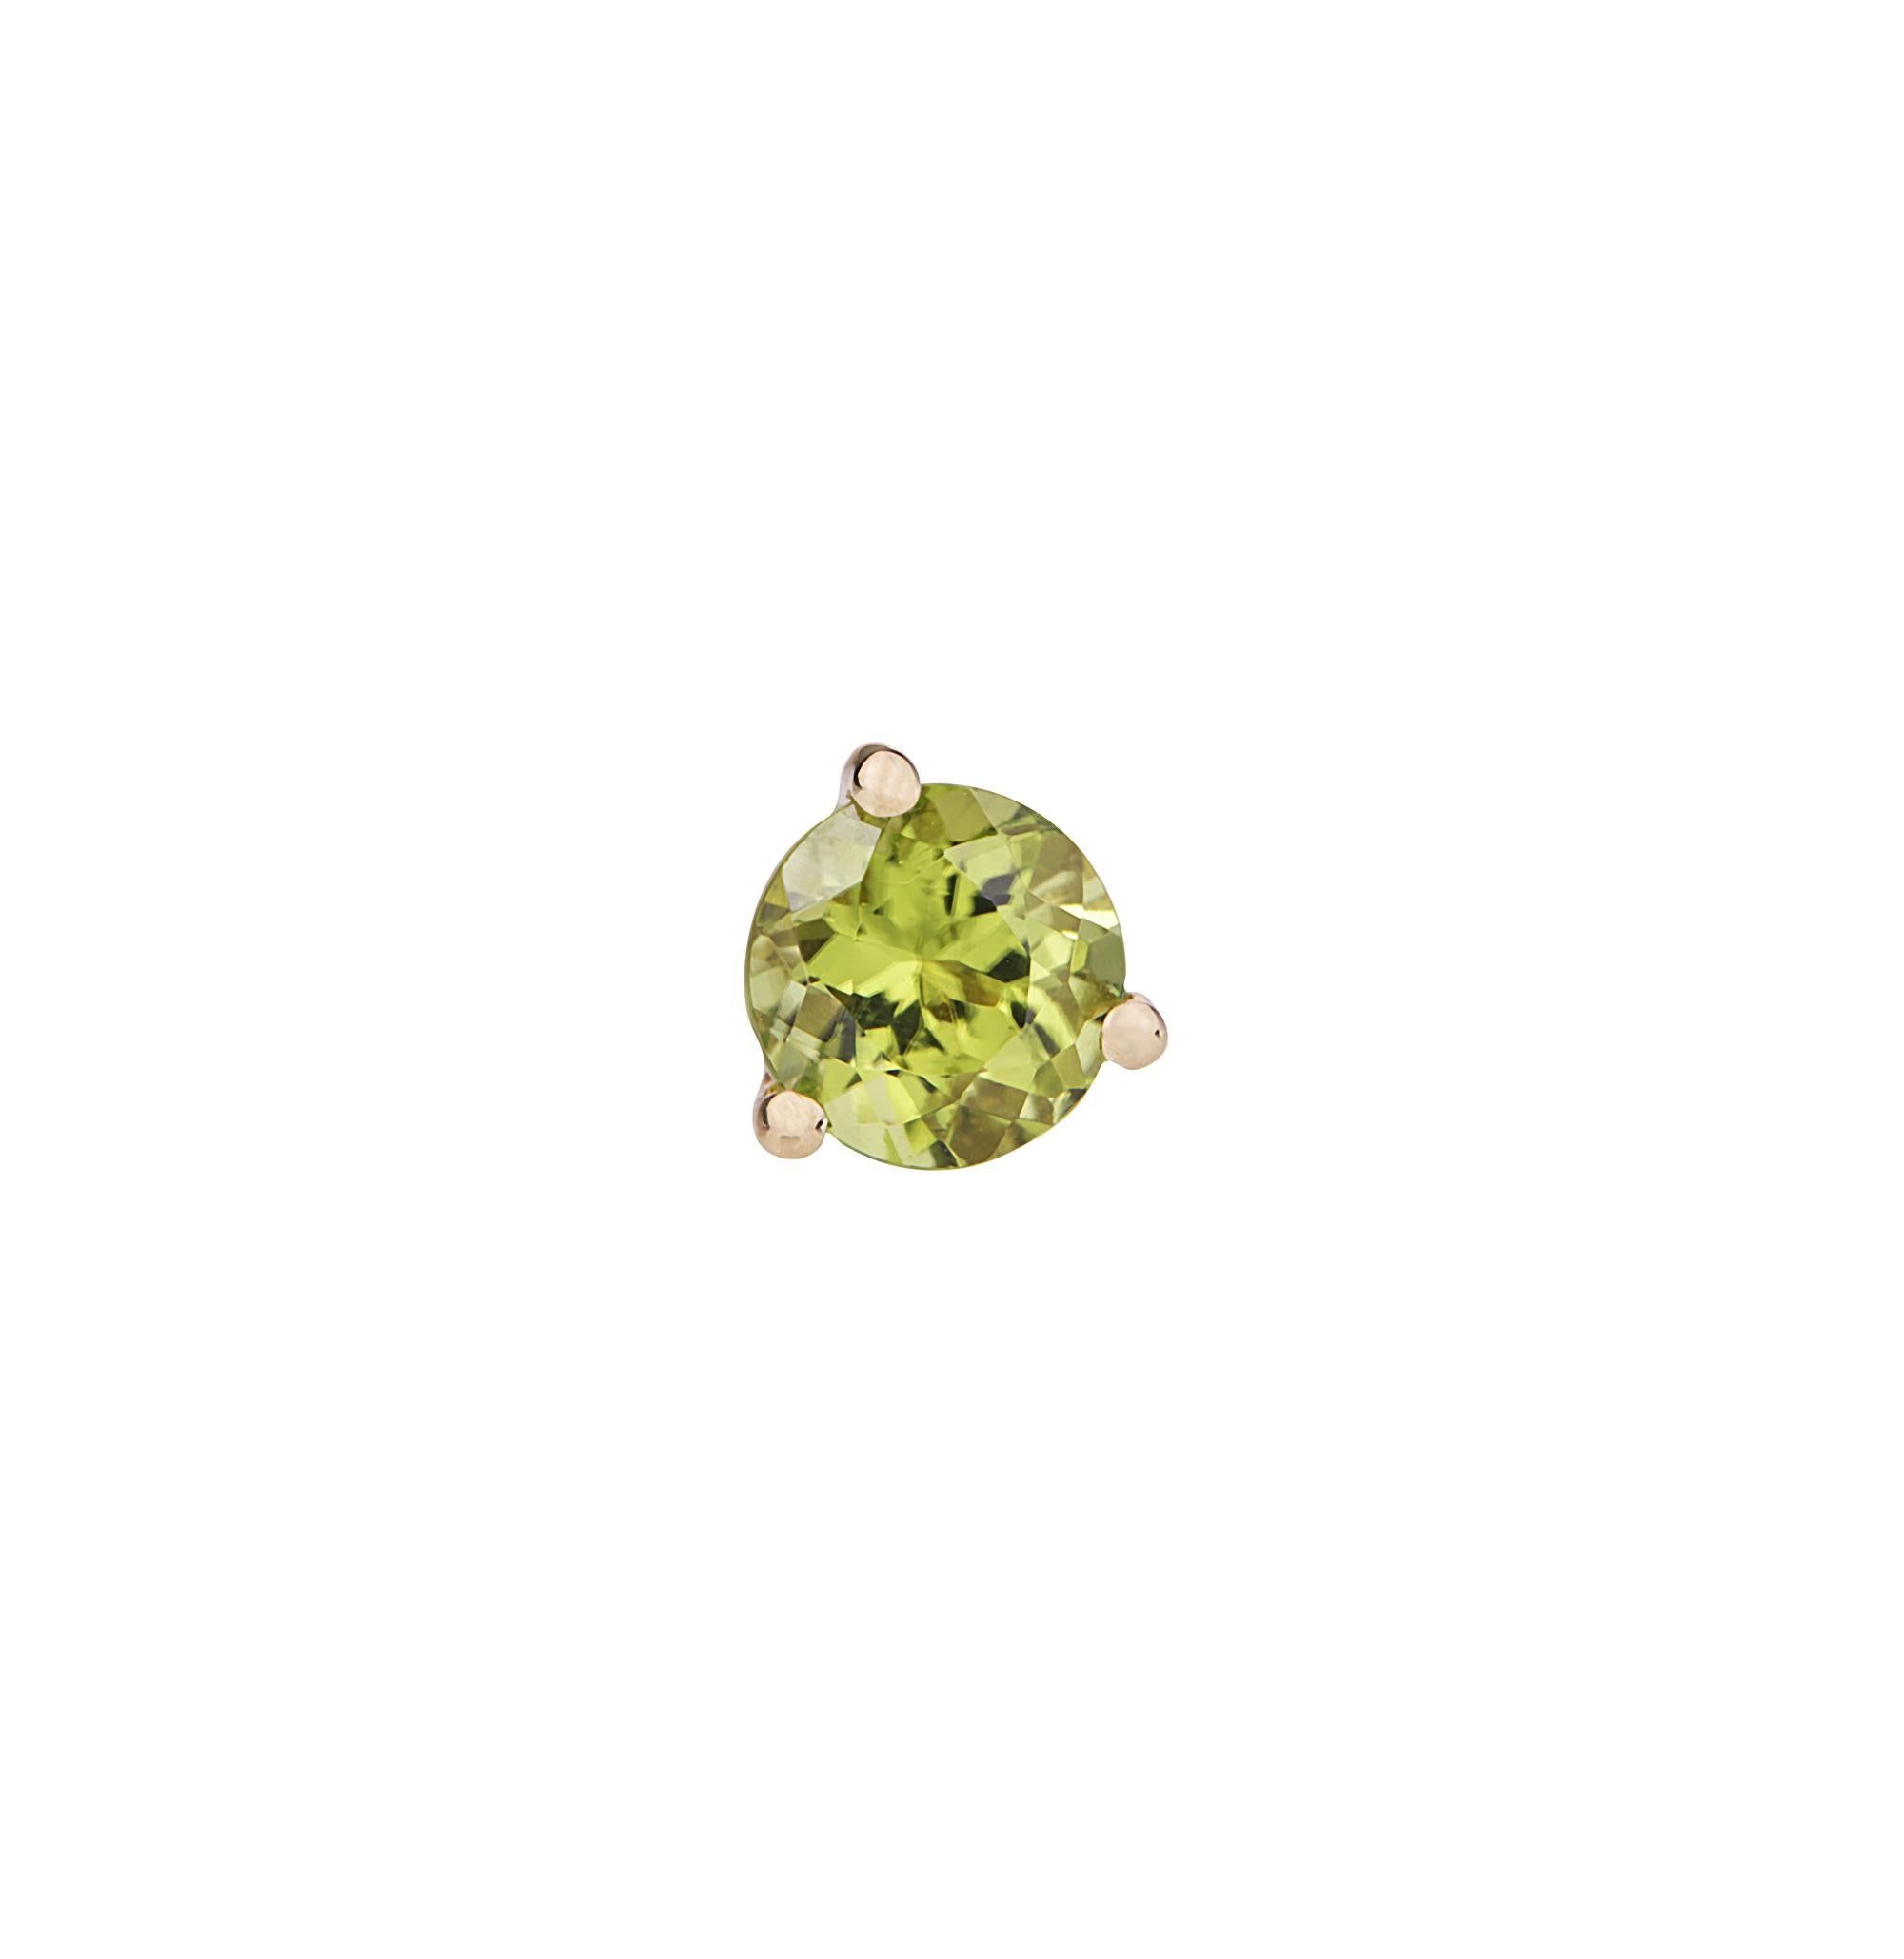 •	18 Karat Recycled Yellow Gold 
•	Available color: Yellow Gold
��•	Peridot 6mm round cut
•	Origin: Caparaó mine, Brazil
•	Hand-made in Spain
•	If you need any orders expedited, please contact 1stdibs and we will try our best to make it work 
•	Match